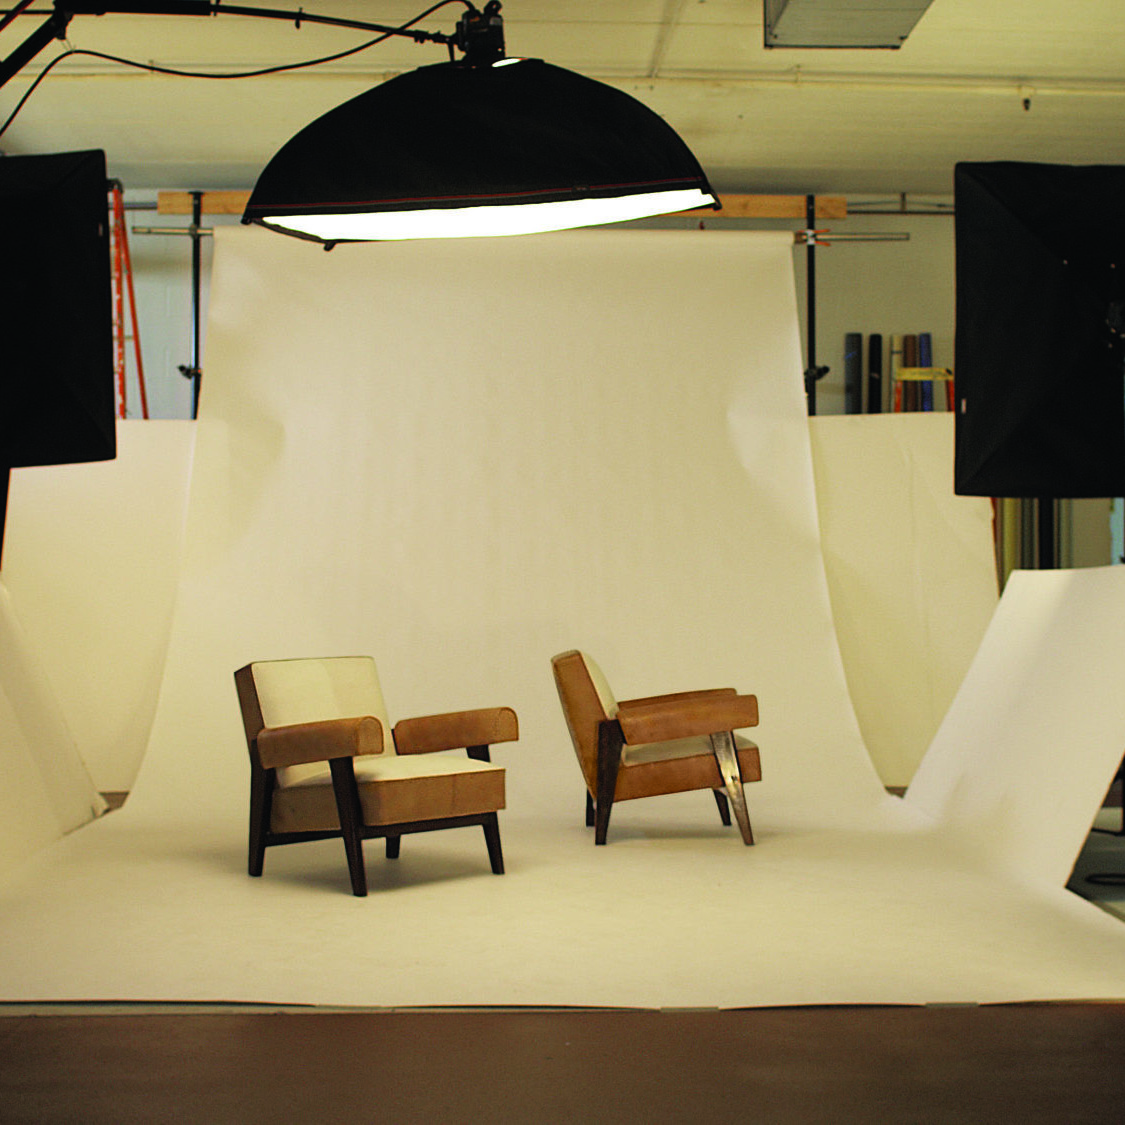 A video still of Amie Siegel's Provenance,2013 featuring a two chairs being photographed in a studio.